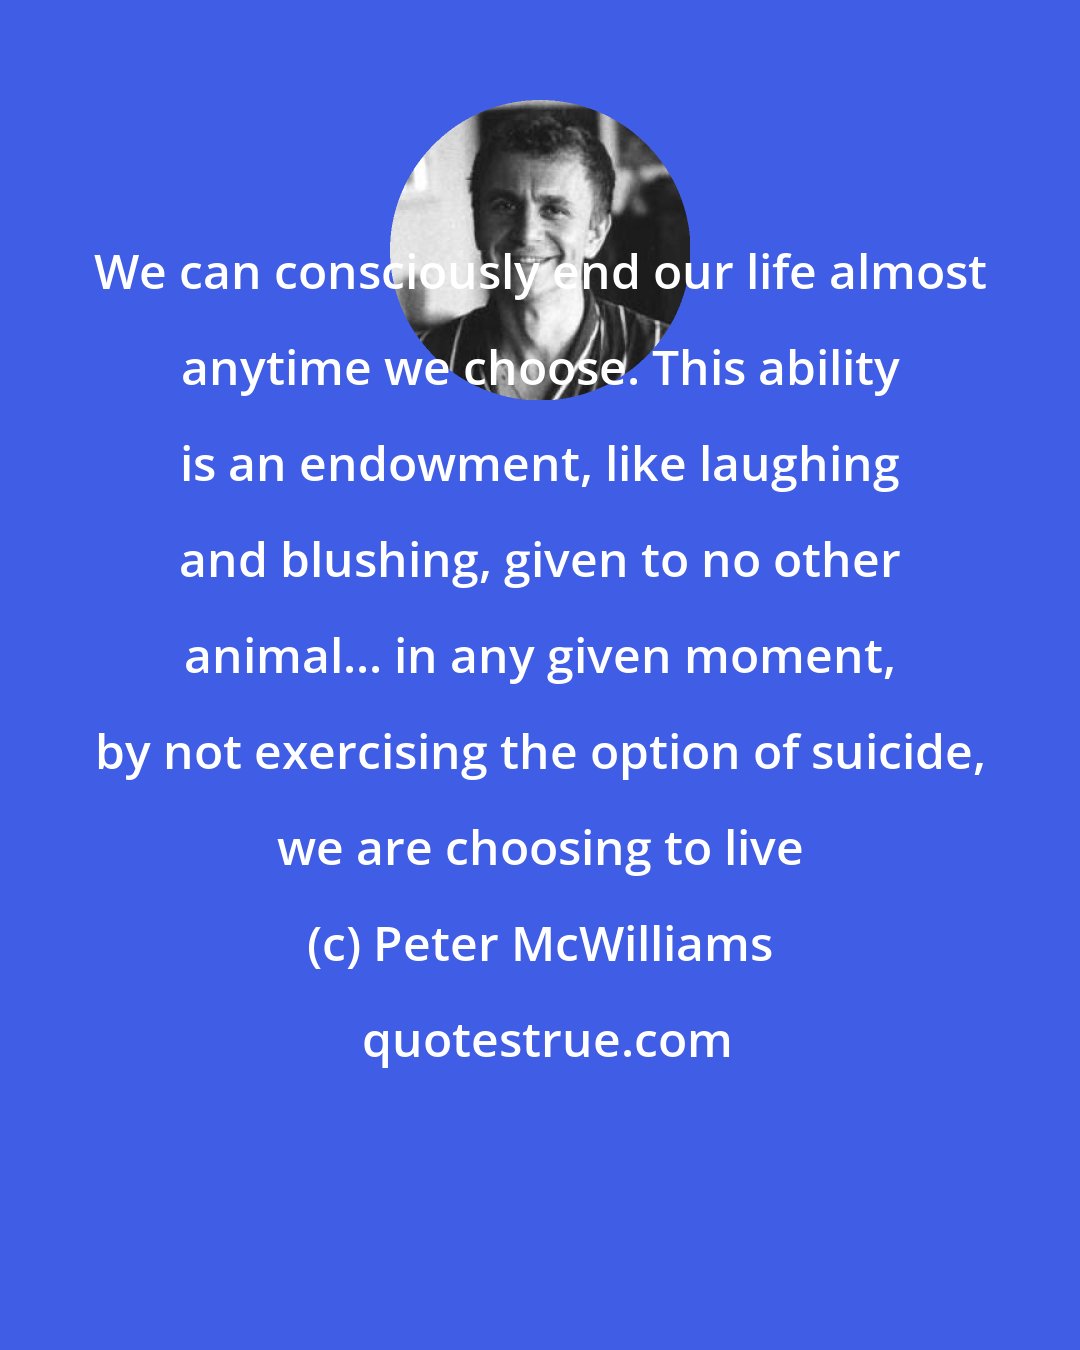 Peter McWilliams: We can consciously end our life almost anytime we choose. This ability is an endowment, like laughing and blushing, given to no other animal... in any given moment, by not exercising the option of suicide, we are choosing to live